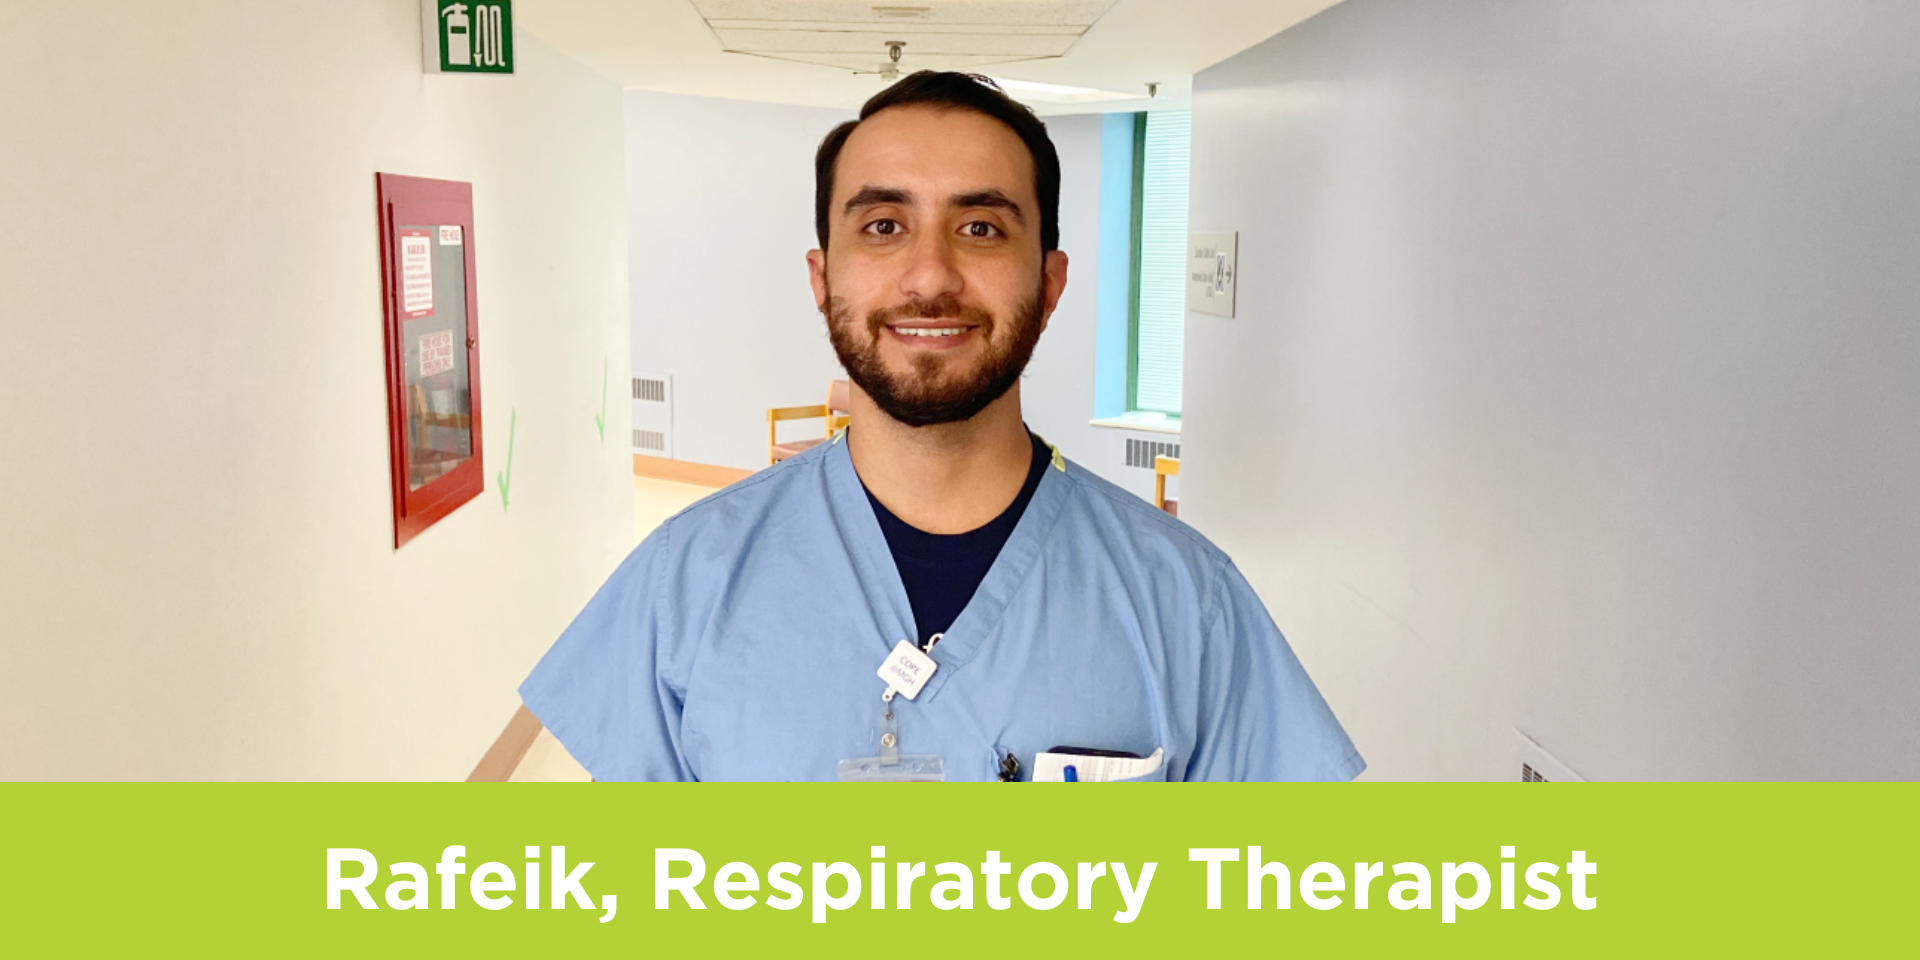 Rafeik Nessim centred in the photo with a rectangular green banner at the bottom that reads "Rafeik - Respiratory Therapist"